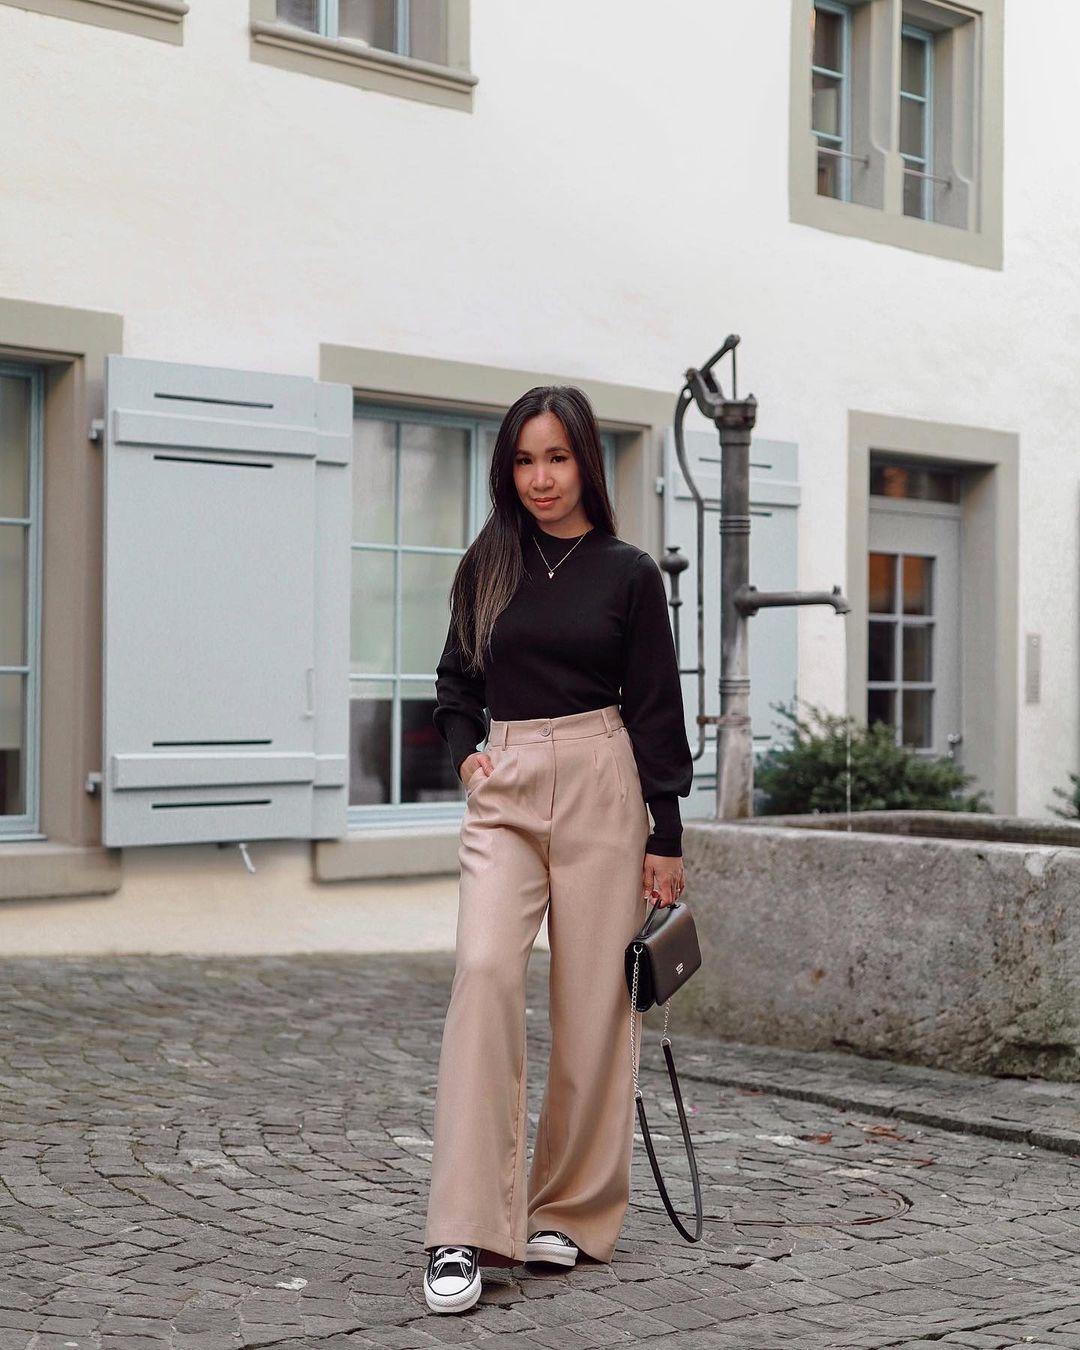 class="content__text"
 Ad/ Sunday Casual 🤎🖤
Full Outfit: @kays_mode 

Use code: HM20 for 20% off your orders at www.kays.ch (only valid in Switzerland &amp; Liechtenstein) 
 